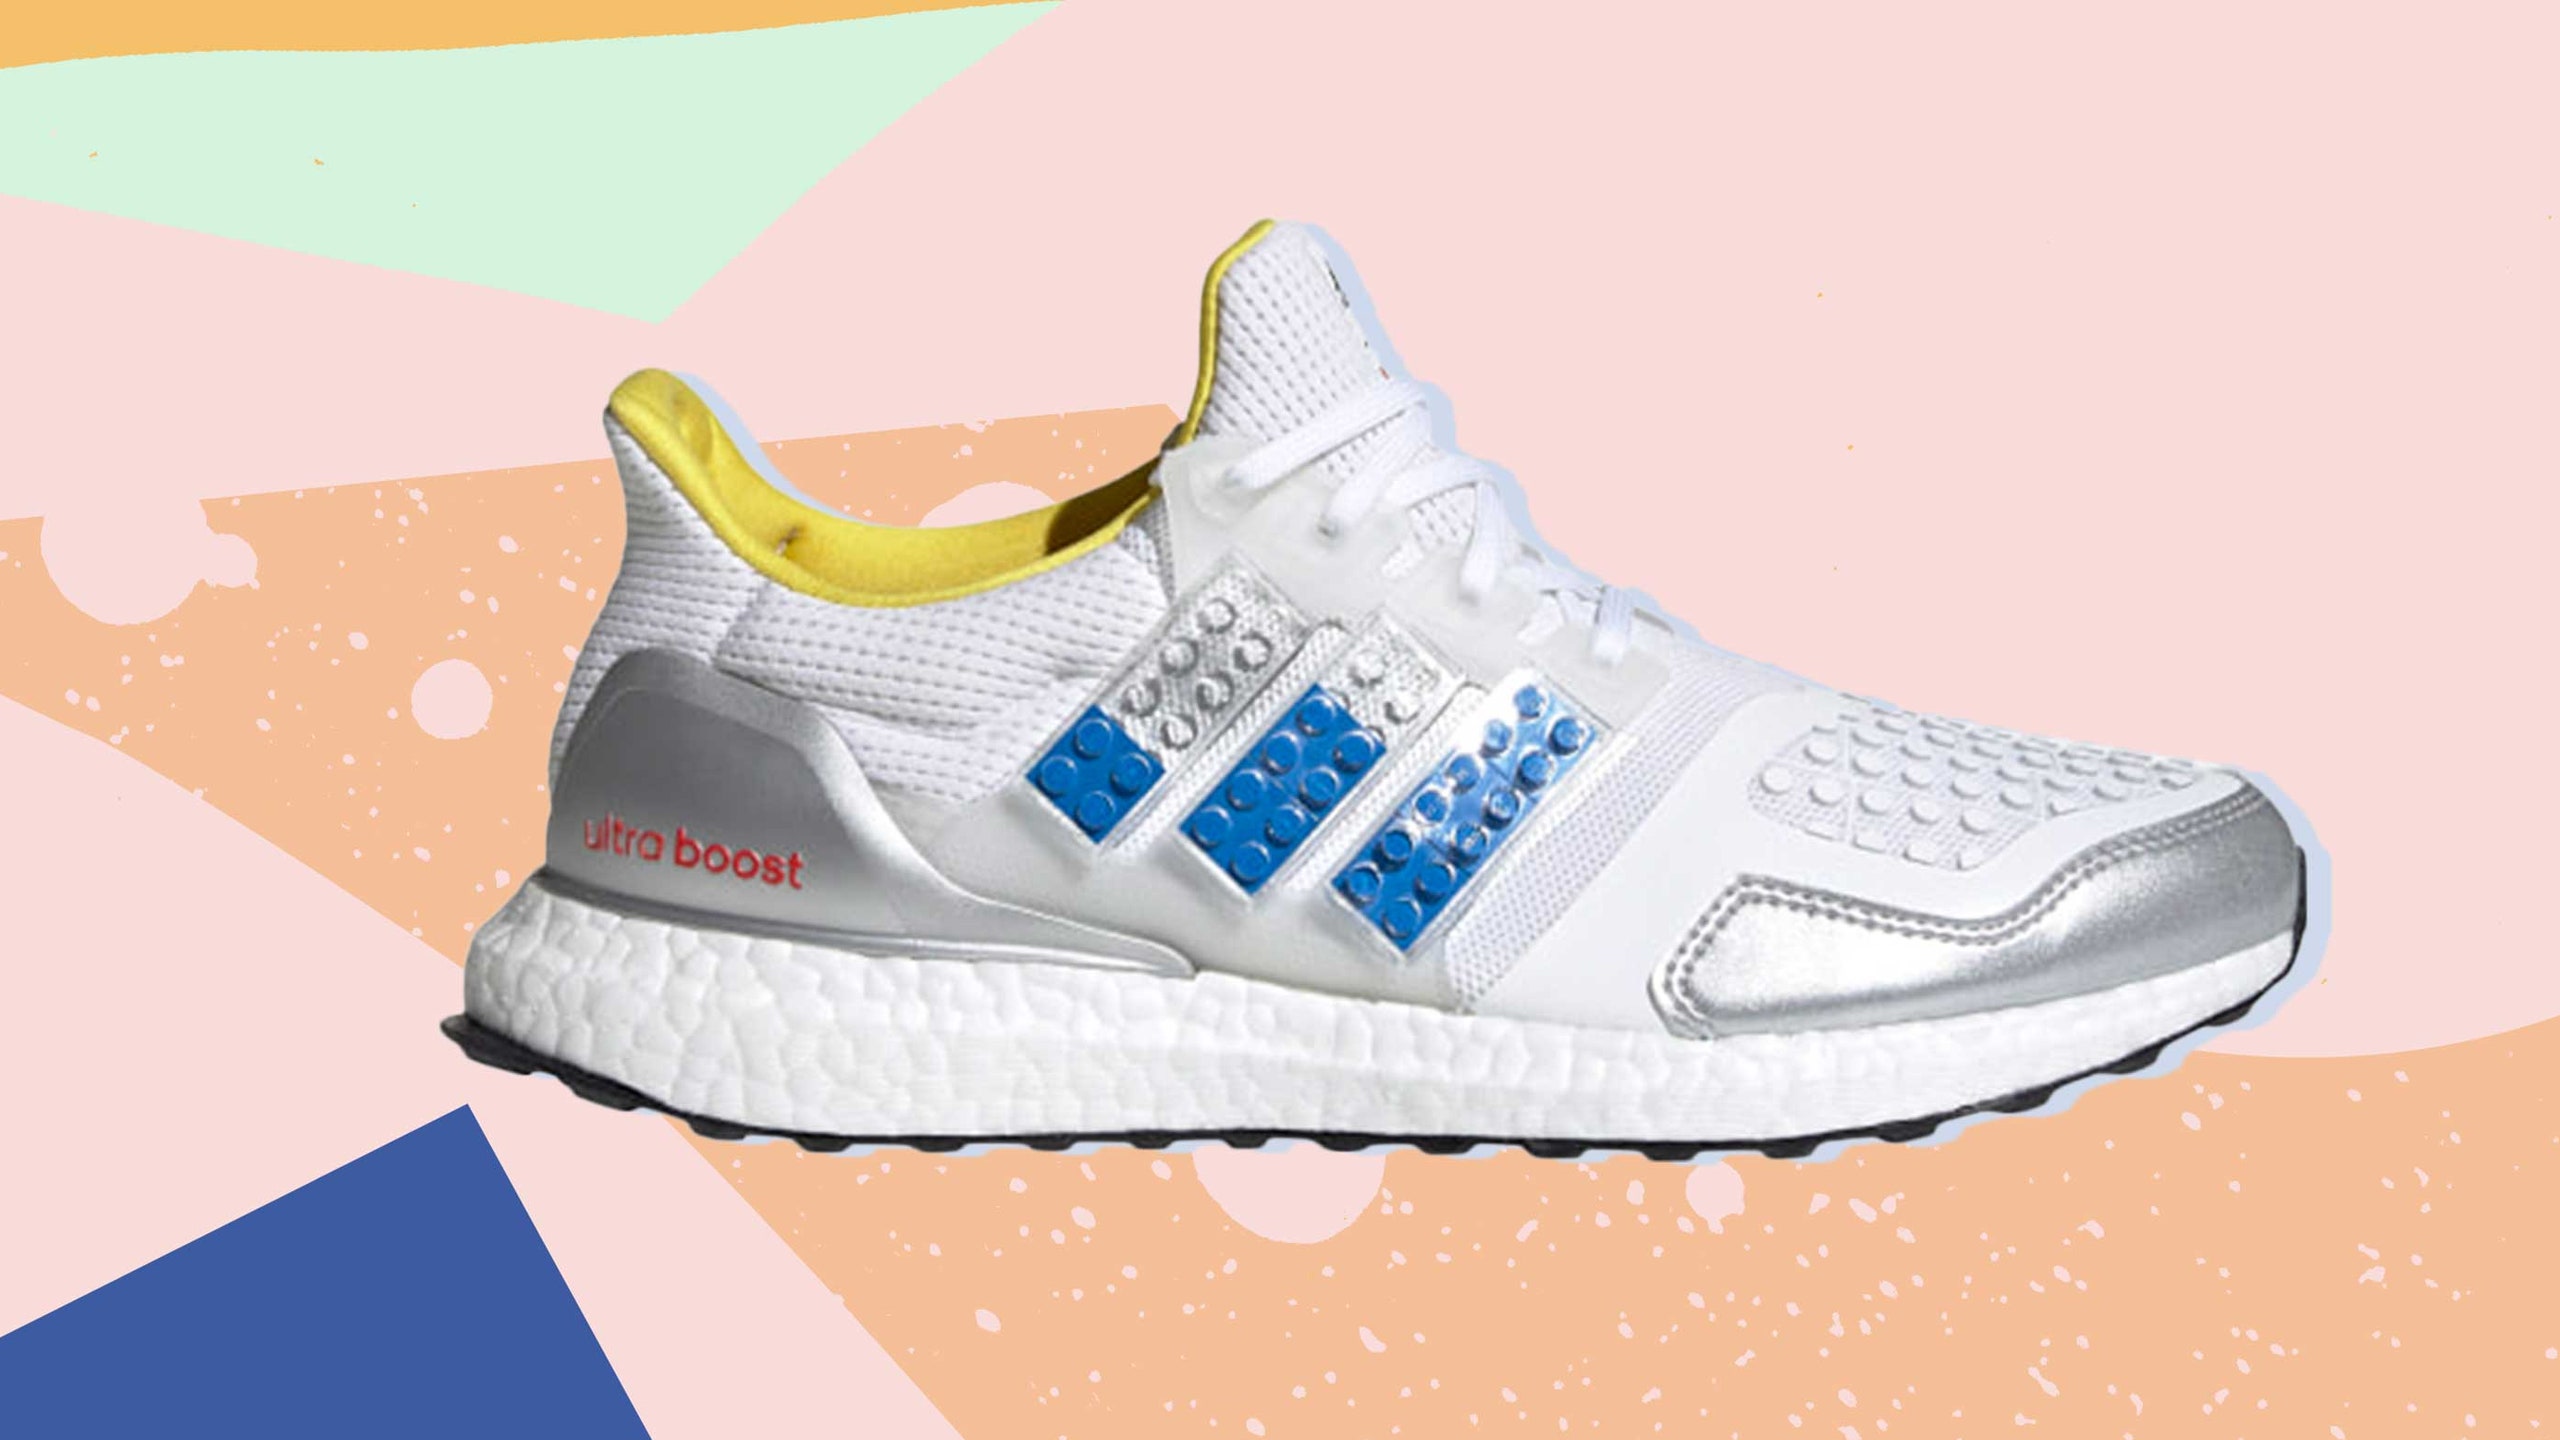 Adidas Launch Custom Lego Ultraboost Trainers We Want For Summer